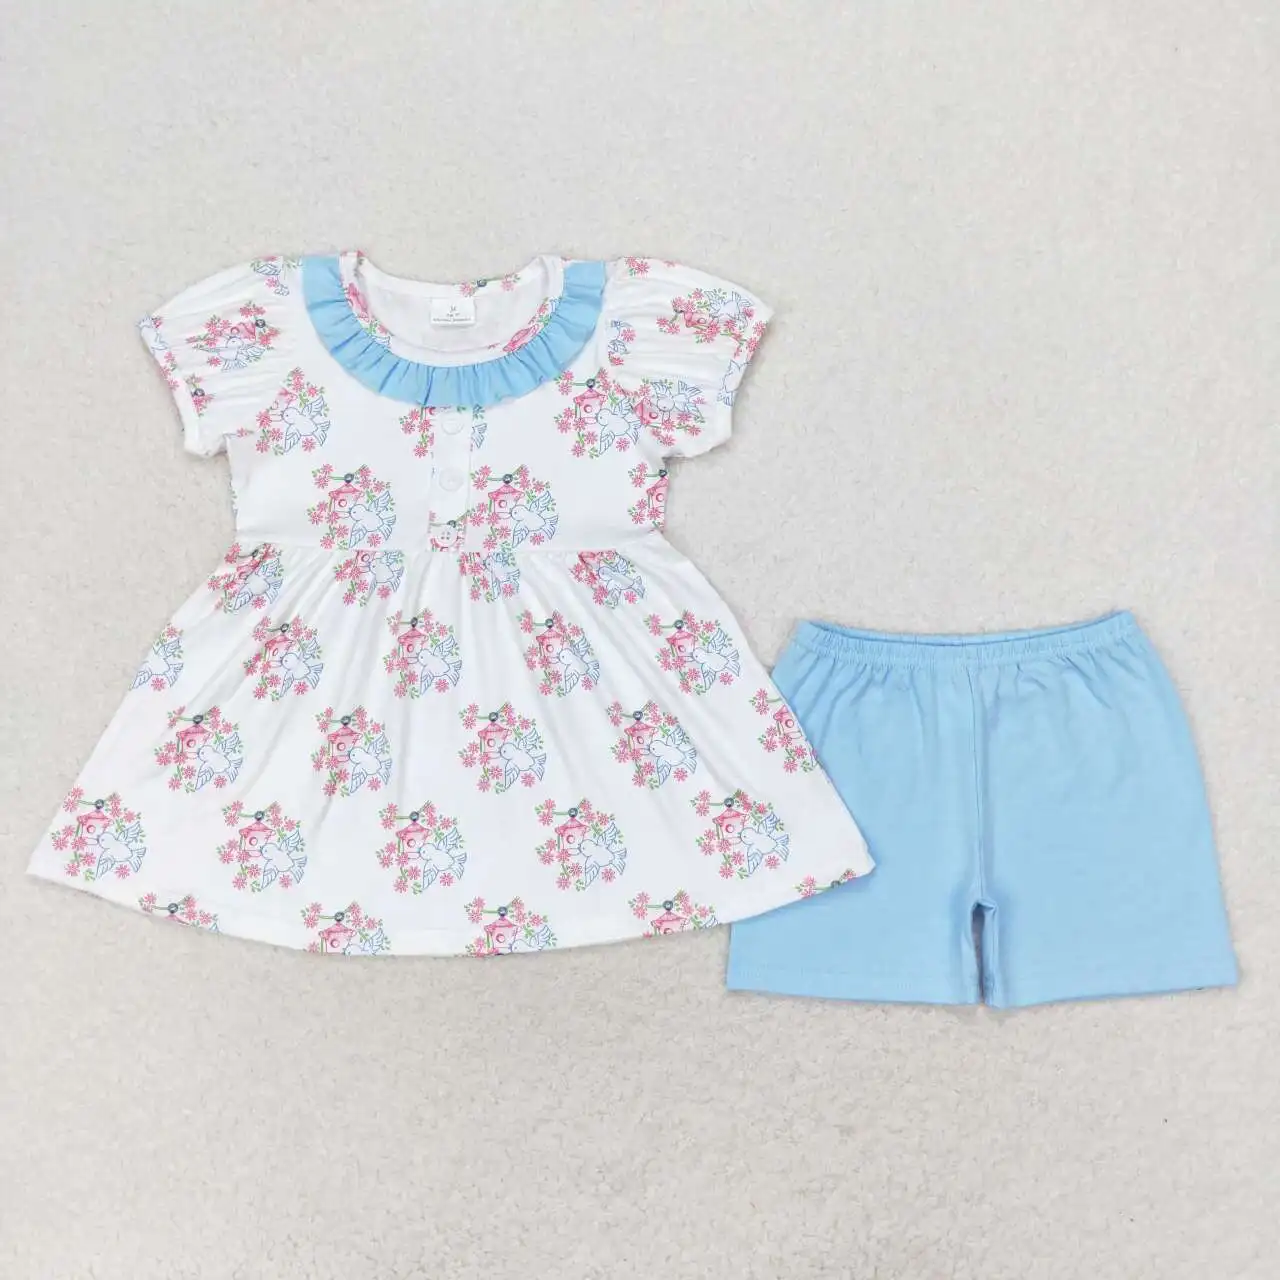 

Baby Girls pink Floral outfits summer clothing Toddlers wholesale boutique Baby Short Sleeves Top Shorts Kids new arrival sets